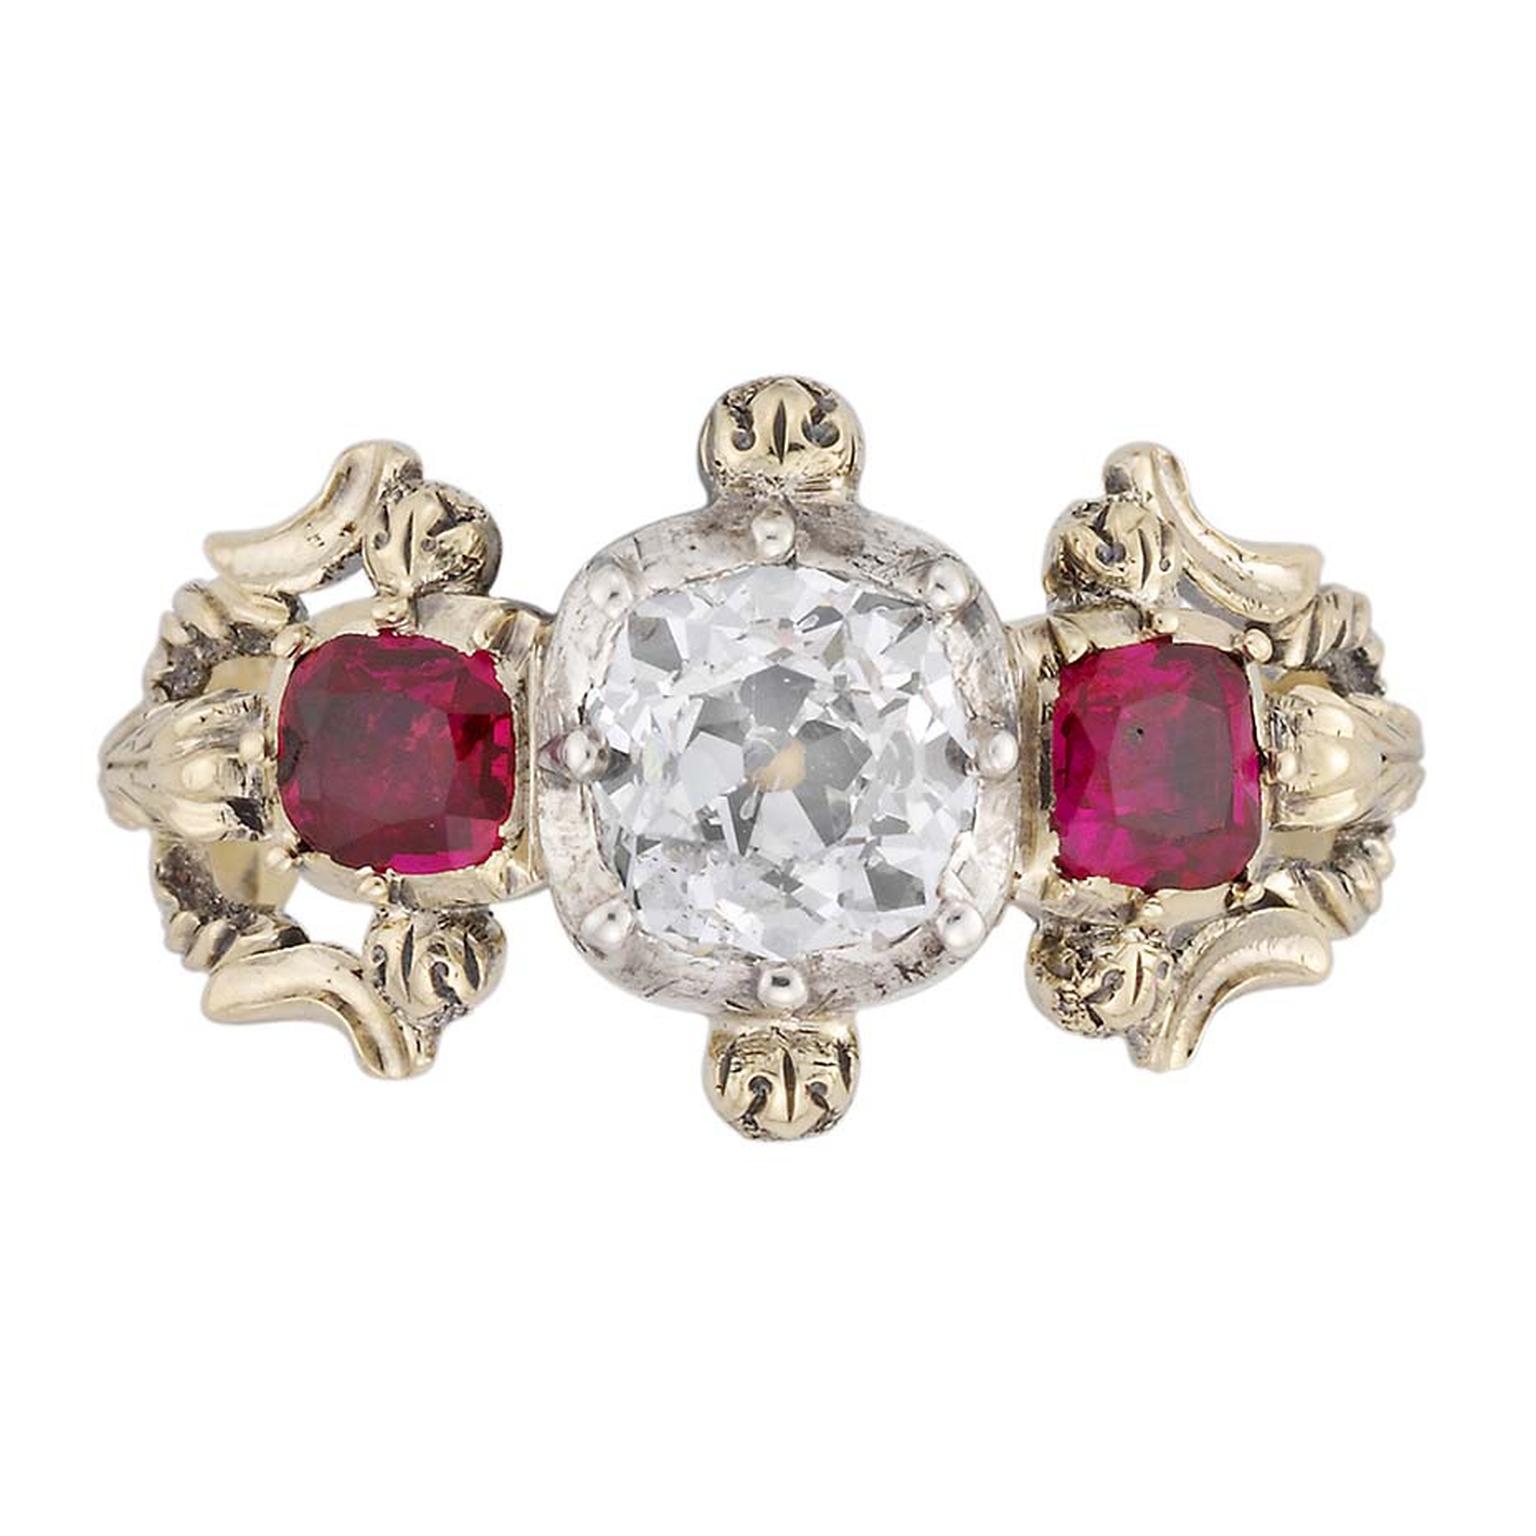 Bentley & Skinner three stone Victorian engagement ring with an old brilliant-cut diamond at its centre and two cushion-shaped rubies on either side. It dates from around 1850.